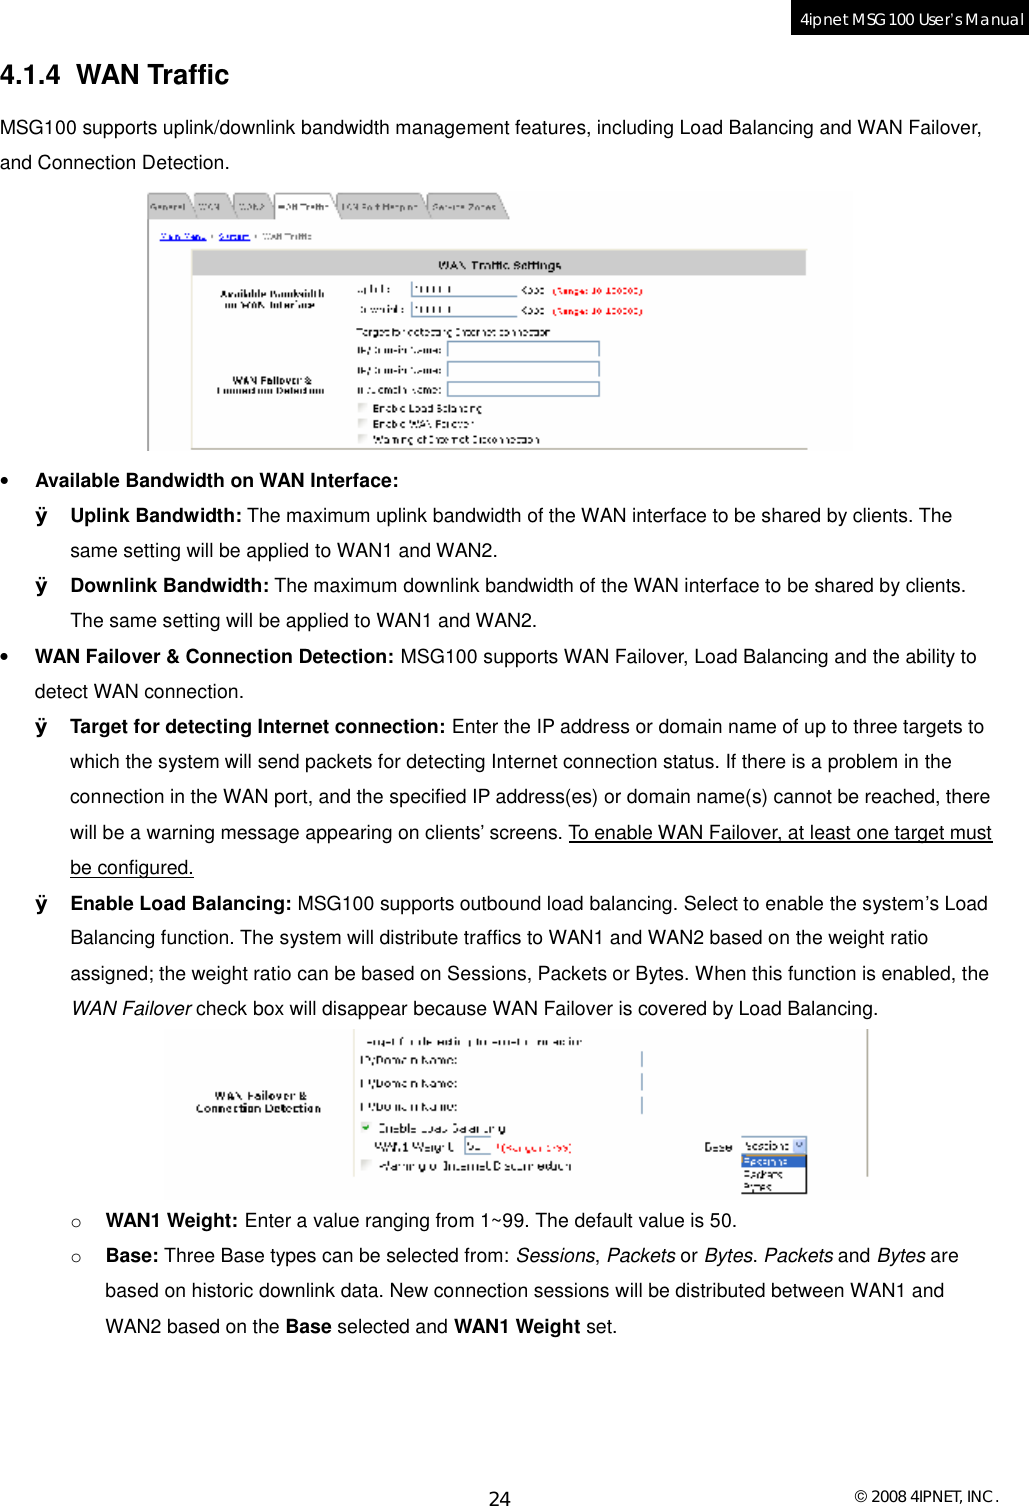  © 2008 4IPNET, INC. 24 4ipnet MSG100 User’s Manual  4.1.4 WAN Traffic MSG100 supports uplink/downlink bandwidth management features, including Load Balancing and WAN Failover, and Connection Detection.   • Available Bandwidth on WAN Interface: Ø Uplink Bandwidth: The maximum uplink bandwidth of the WAN interface to be shared by clients. The same setting will be applied to WAN1 and WAN2. Ø Downlink Bandwidth: The maximum downlink bandwidth of the WAN interface to be shared by clients. The same setting will be applied to WAN1 and WAN2. • WAN Failover &amp; Connection Detection: MSG100 supports WAN Failover, Load Balancing and the ability to detect WAN connection.  Ø Target for detecting Internet connection: Enter the IP address or domain name of up to three targets to which the system will send packets for detecting Internet connection status. If there is a problem in the connection in the WAN port, and the specified IP address(es) or domain name(s) cannot be reached, there will be a warning message appearing on clients’ screens. To enable WAN Failover, at least one target must be configured. Ø Enable Load Balancing: MSG100 supports outbound load balancing. Select to enable the system’s Load Balancing function. The system will distribute traffics to WAN1 and WAN2 based on the weight ratio assigned; the weight ratio can be based on Sessions, Packets or Bytes. When this function is enabled, the WAN Failover check box will disappear because WAN Failover is covered by Load Balancing.  o WAN1 Weight: Enter a value ranging from 1~99. The default value is 50. o Base: Three Base types can be selected from: Sessions, Packets or Bytes. Packets and Bytes are based on historic downlink data. New connection sessions will be distributed between WAN1 and WAN2 based on the Base selected and WAN1 Weight set. 